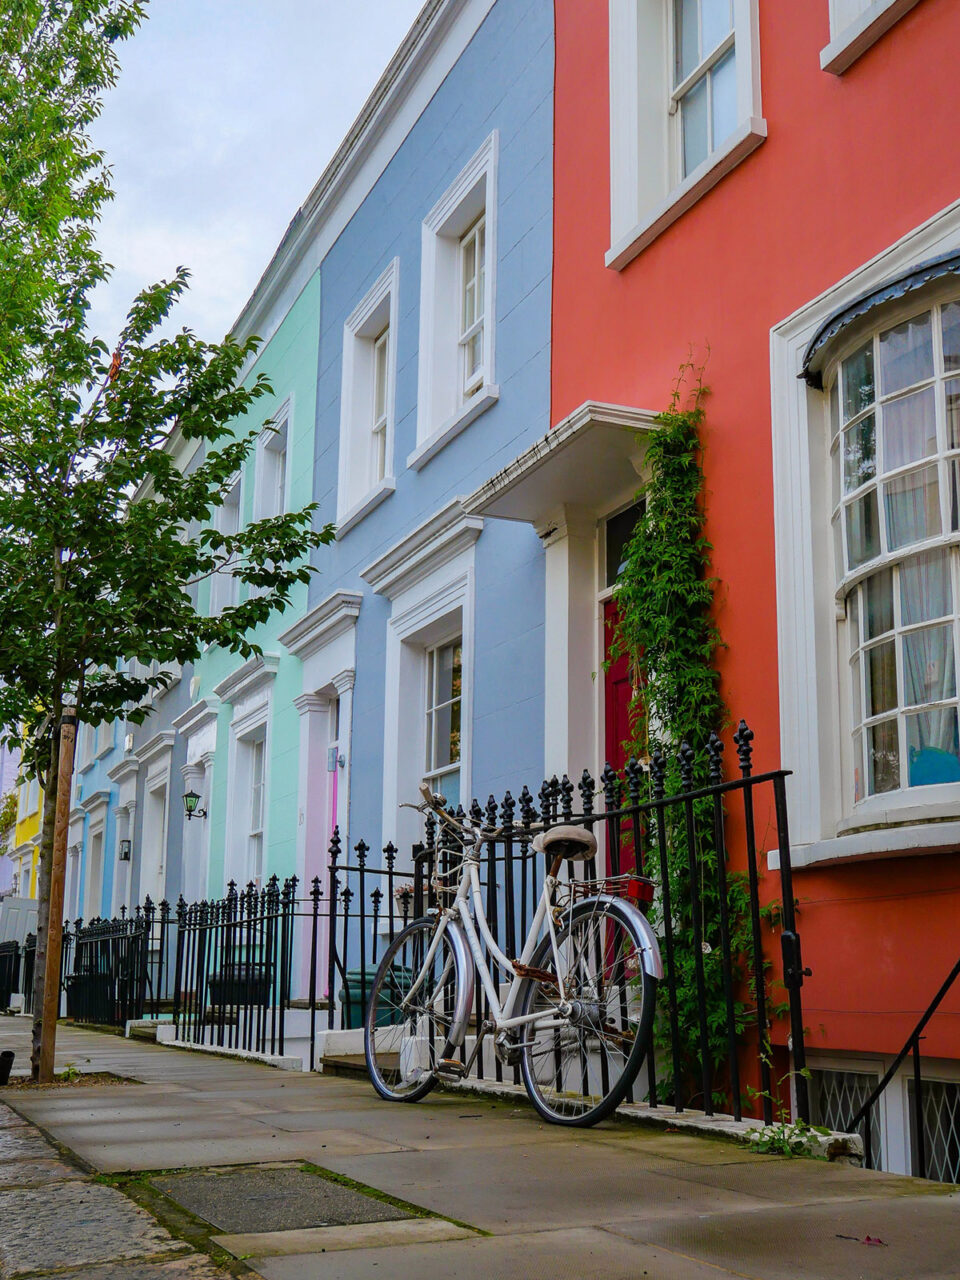 Bike in front of colorful buildings in Notting Hill London